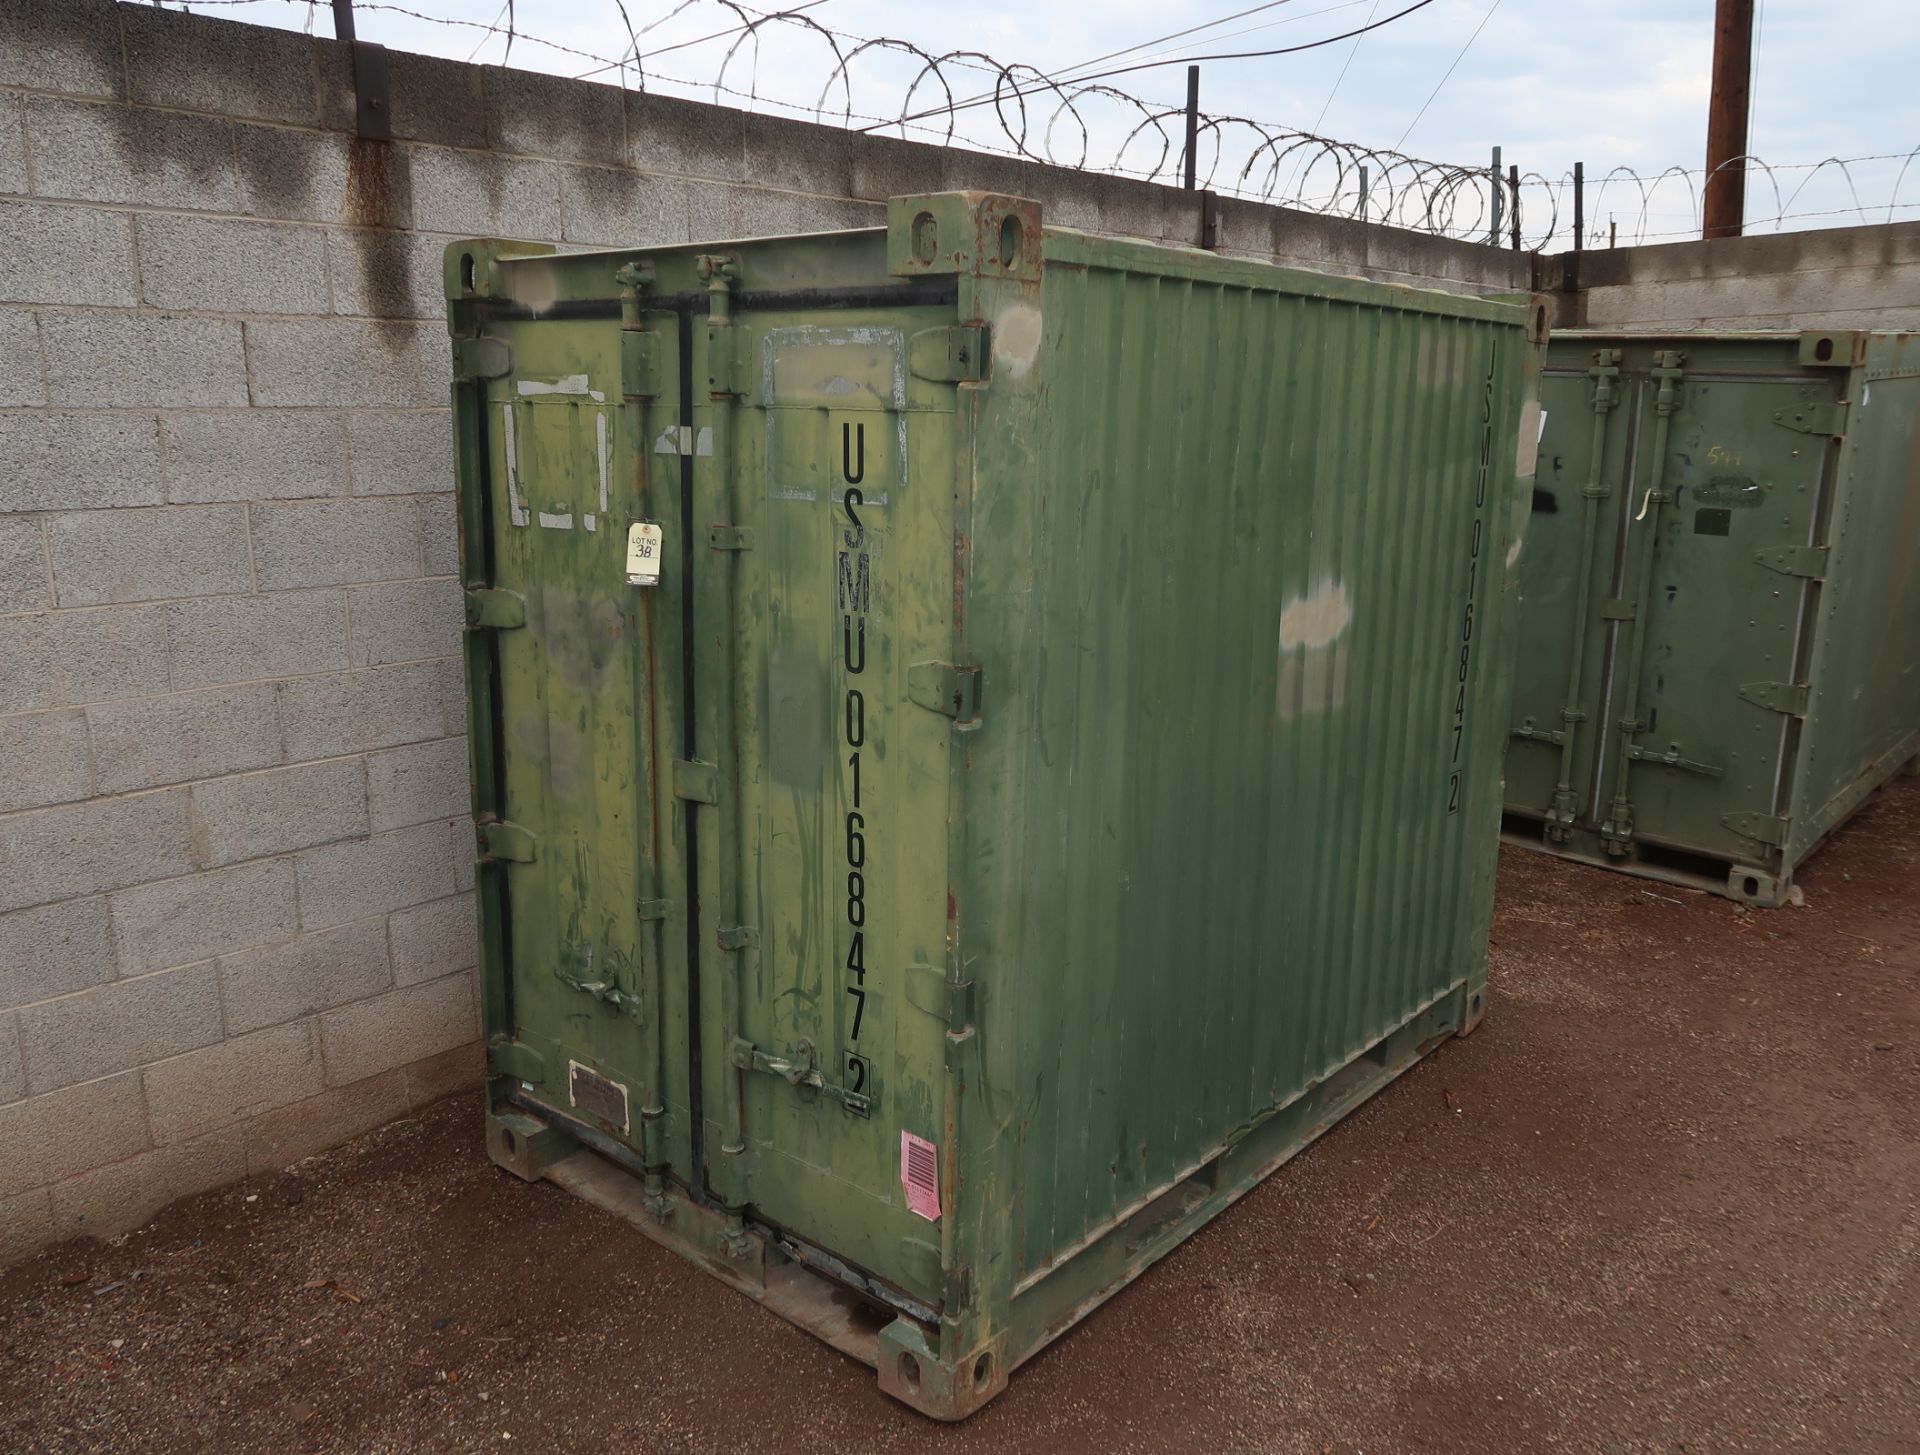 MILITARY STORAGE CONTAINERS 57"W X 81"H X 94"L